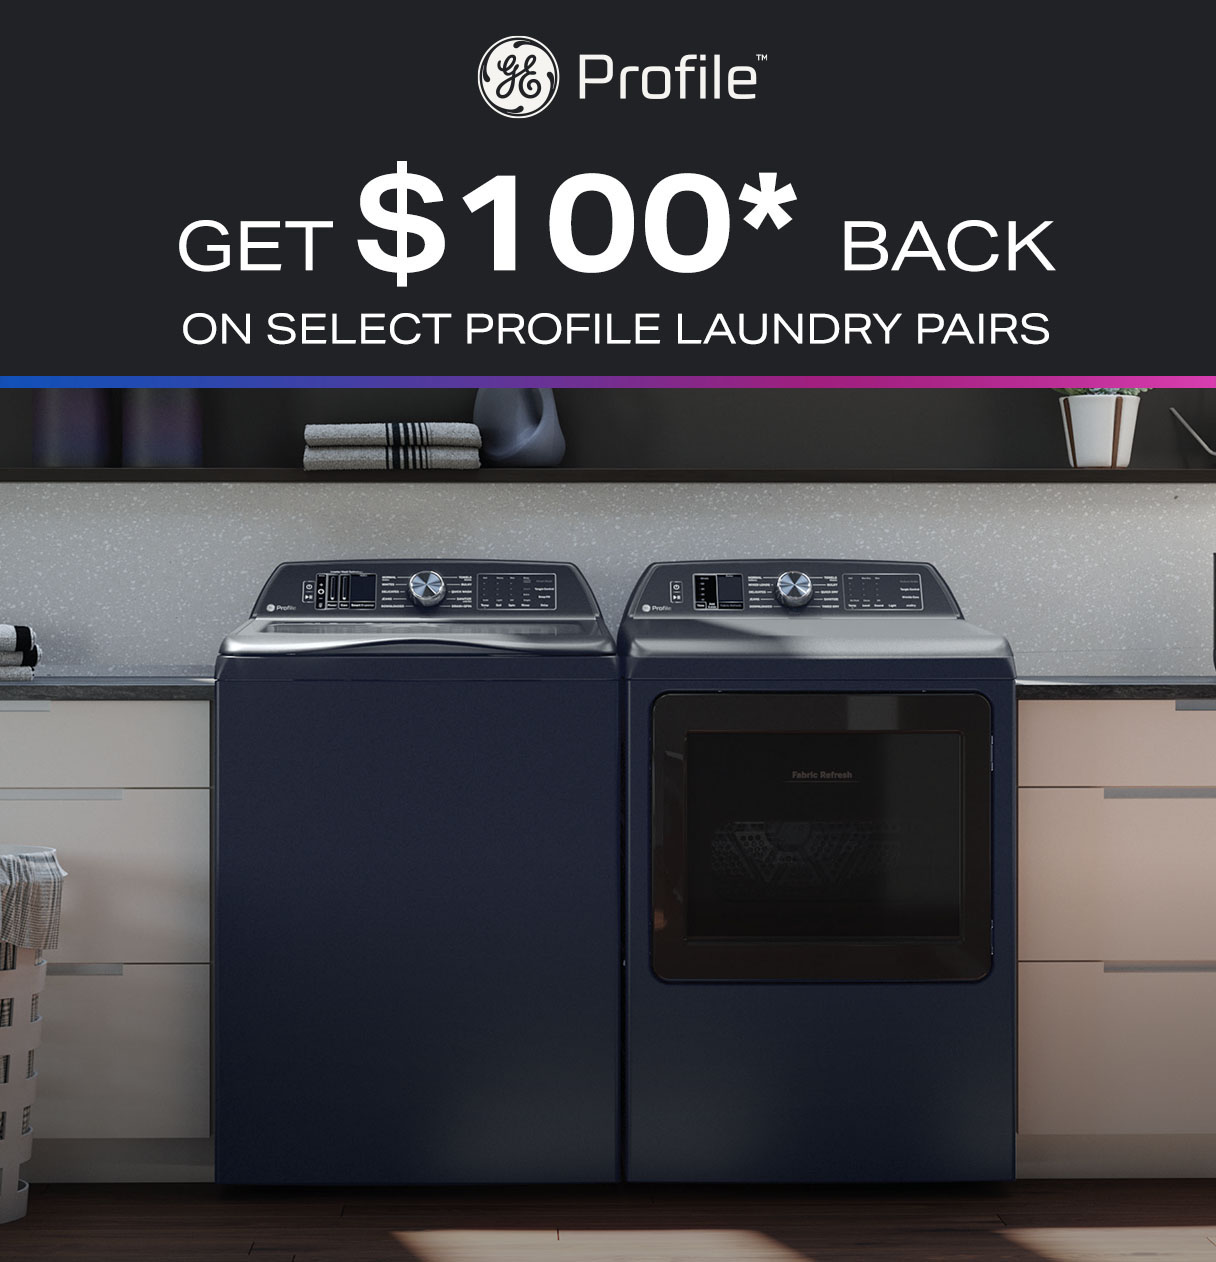 GE Profile - Get $100* back on select Profile laundry pairs